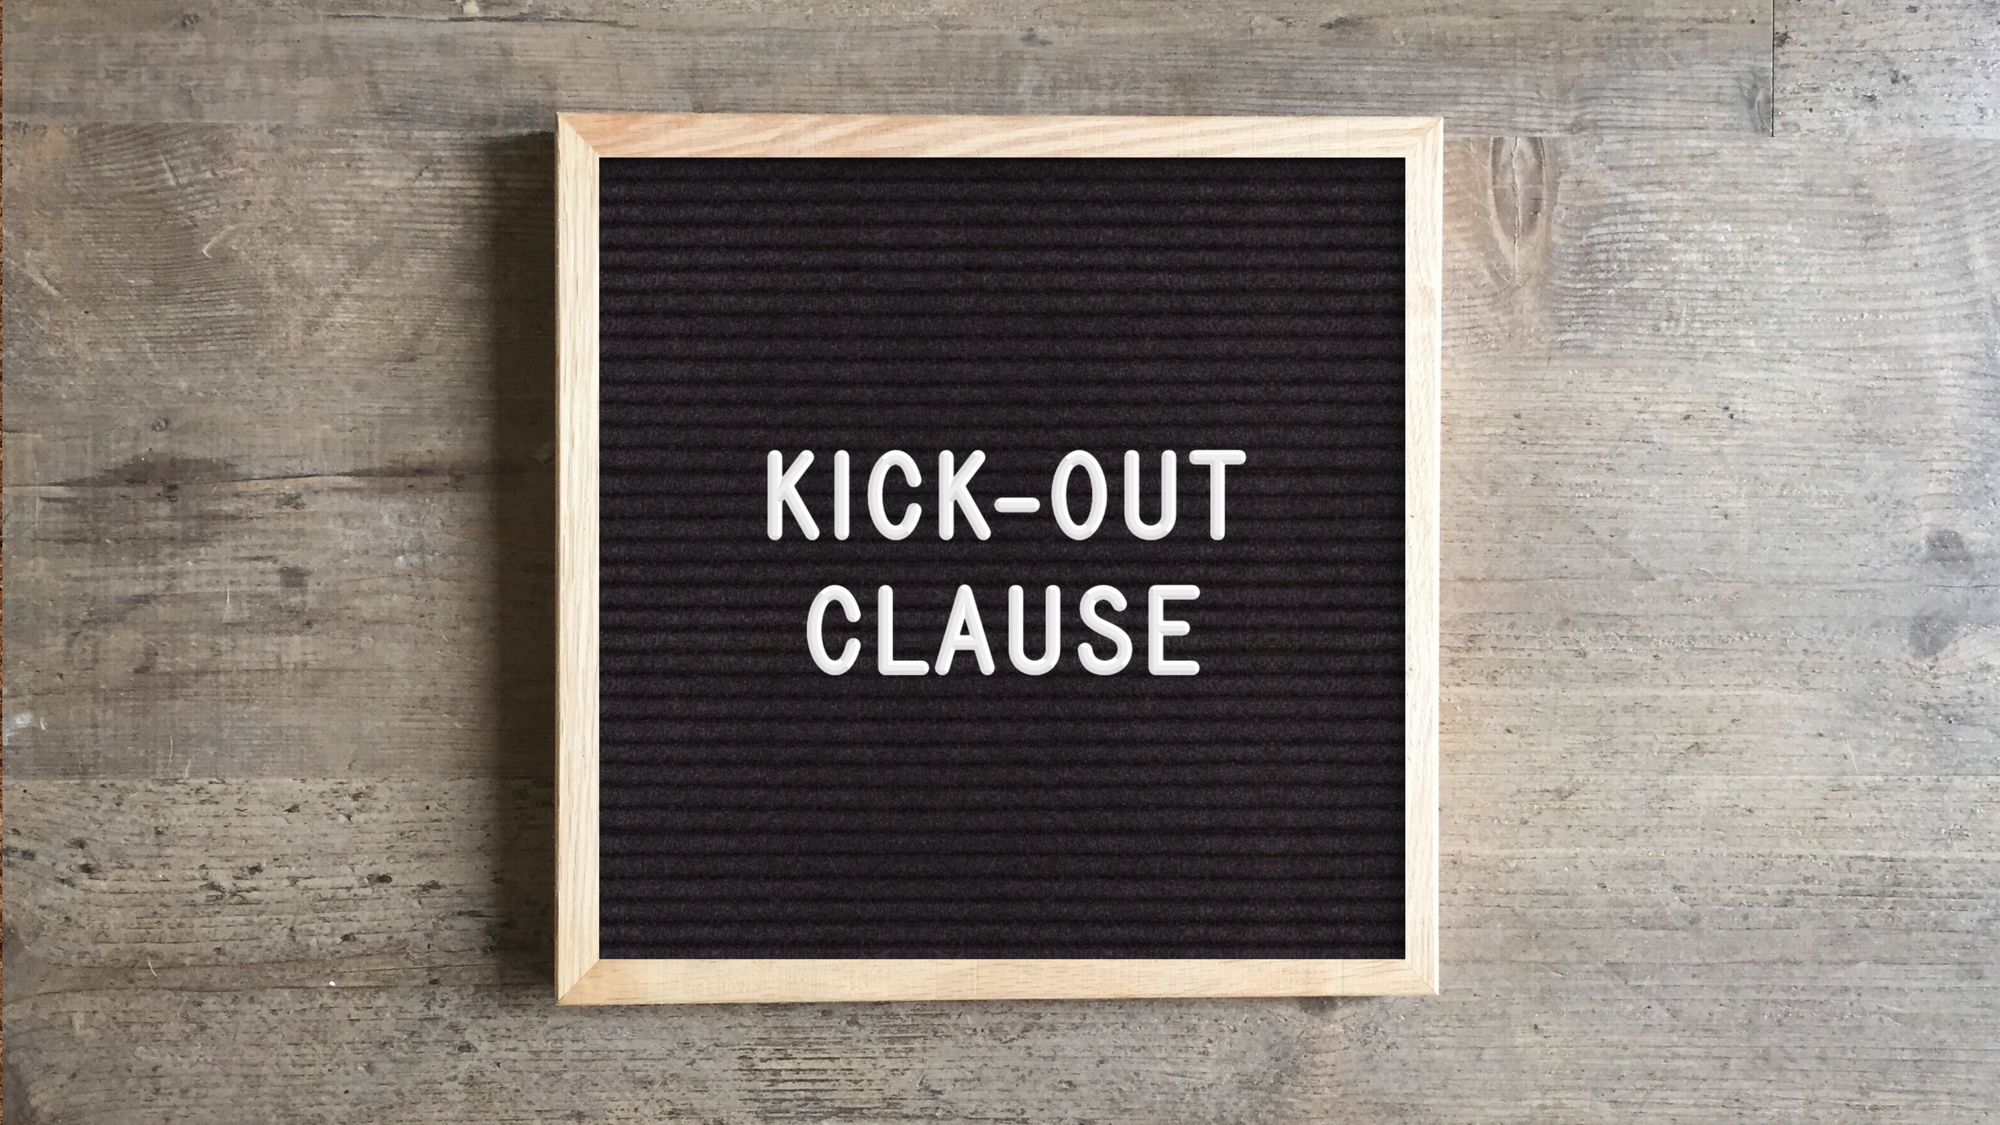 What Is a Kick-Out Clause?